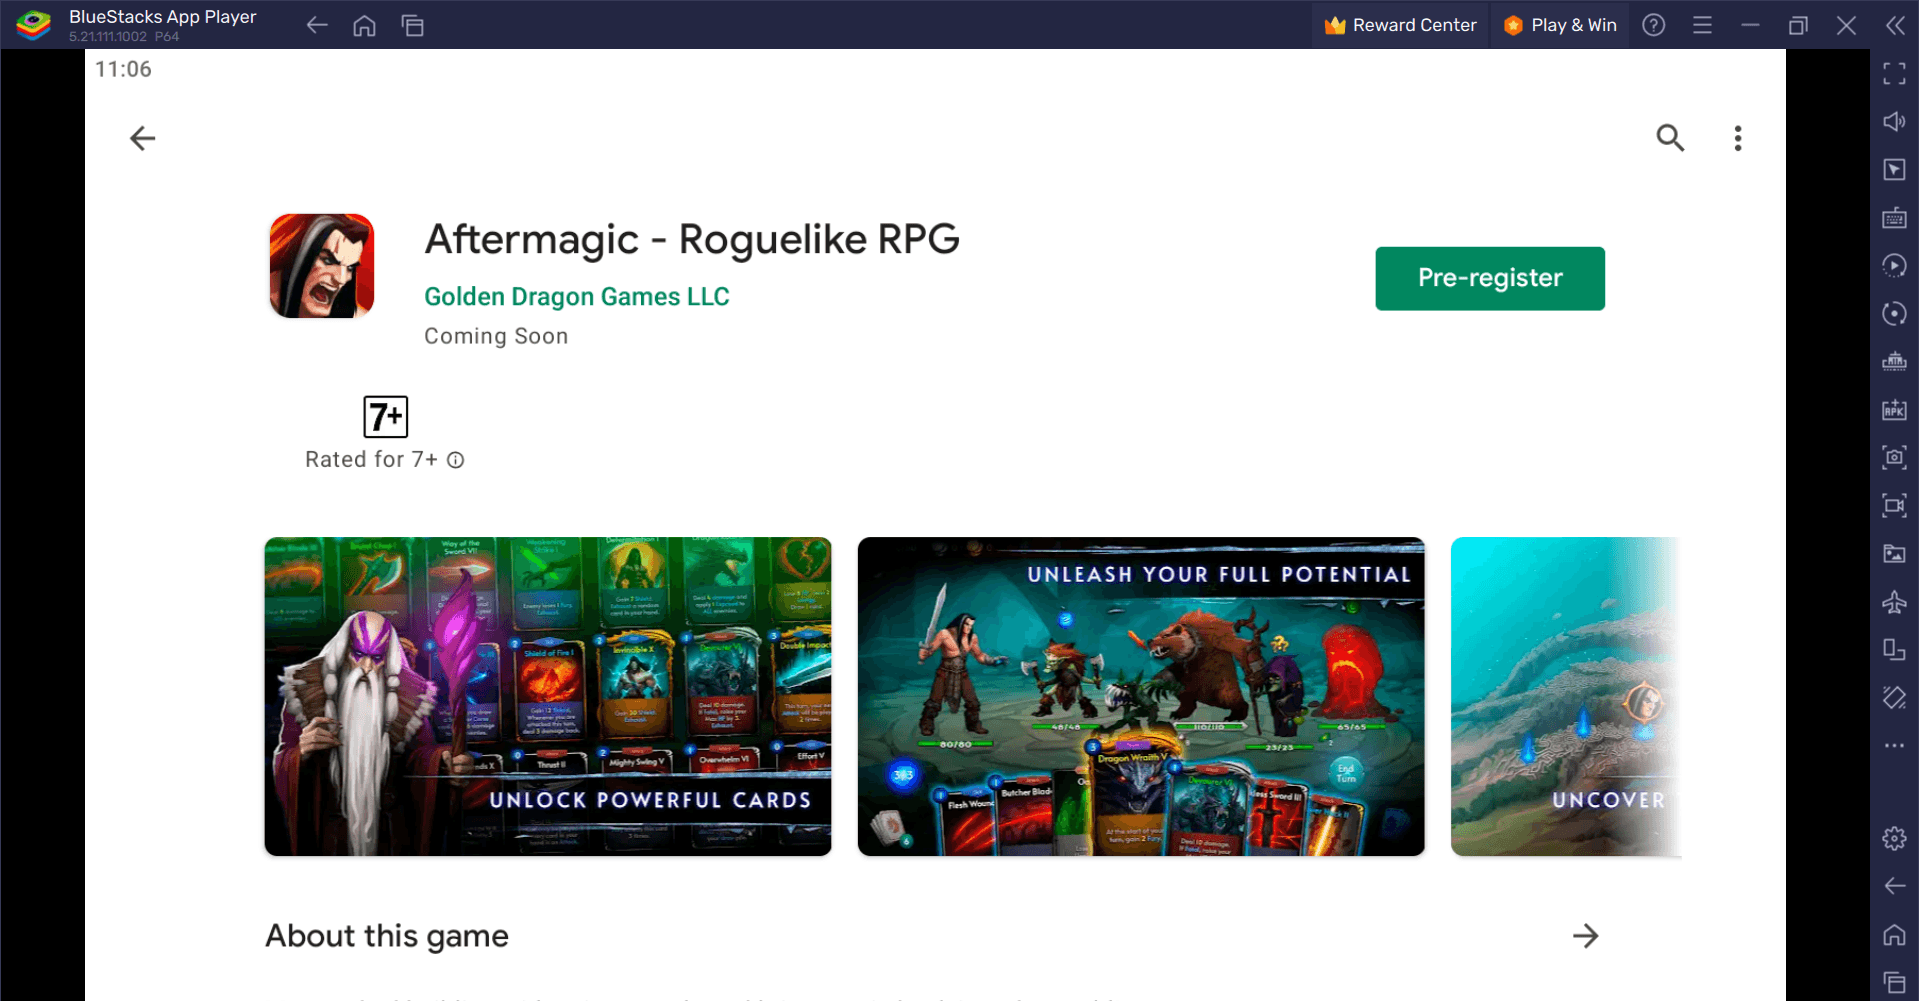 How to Play Aftermagic - Roguelike RPG on PC with BlueStacks